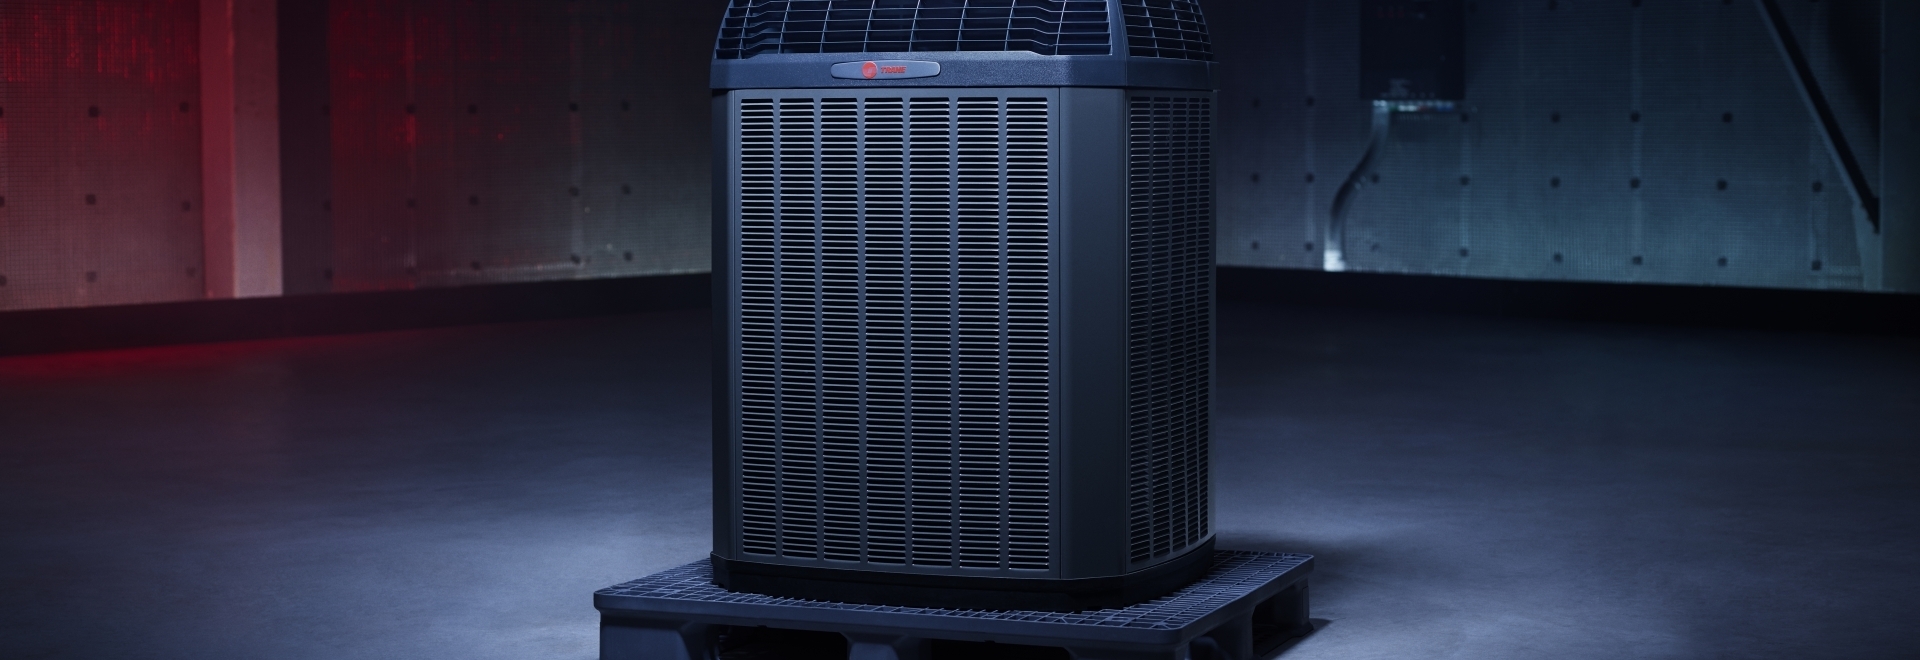 how to avoid common heating issues with trane's hybrid heat pump systems blog header image